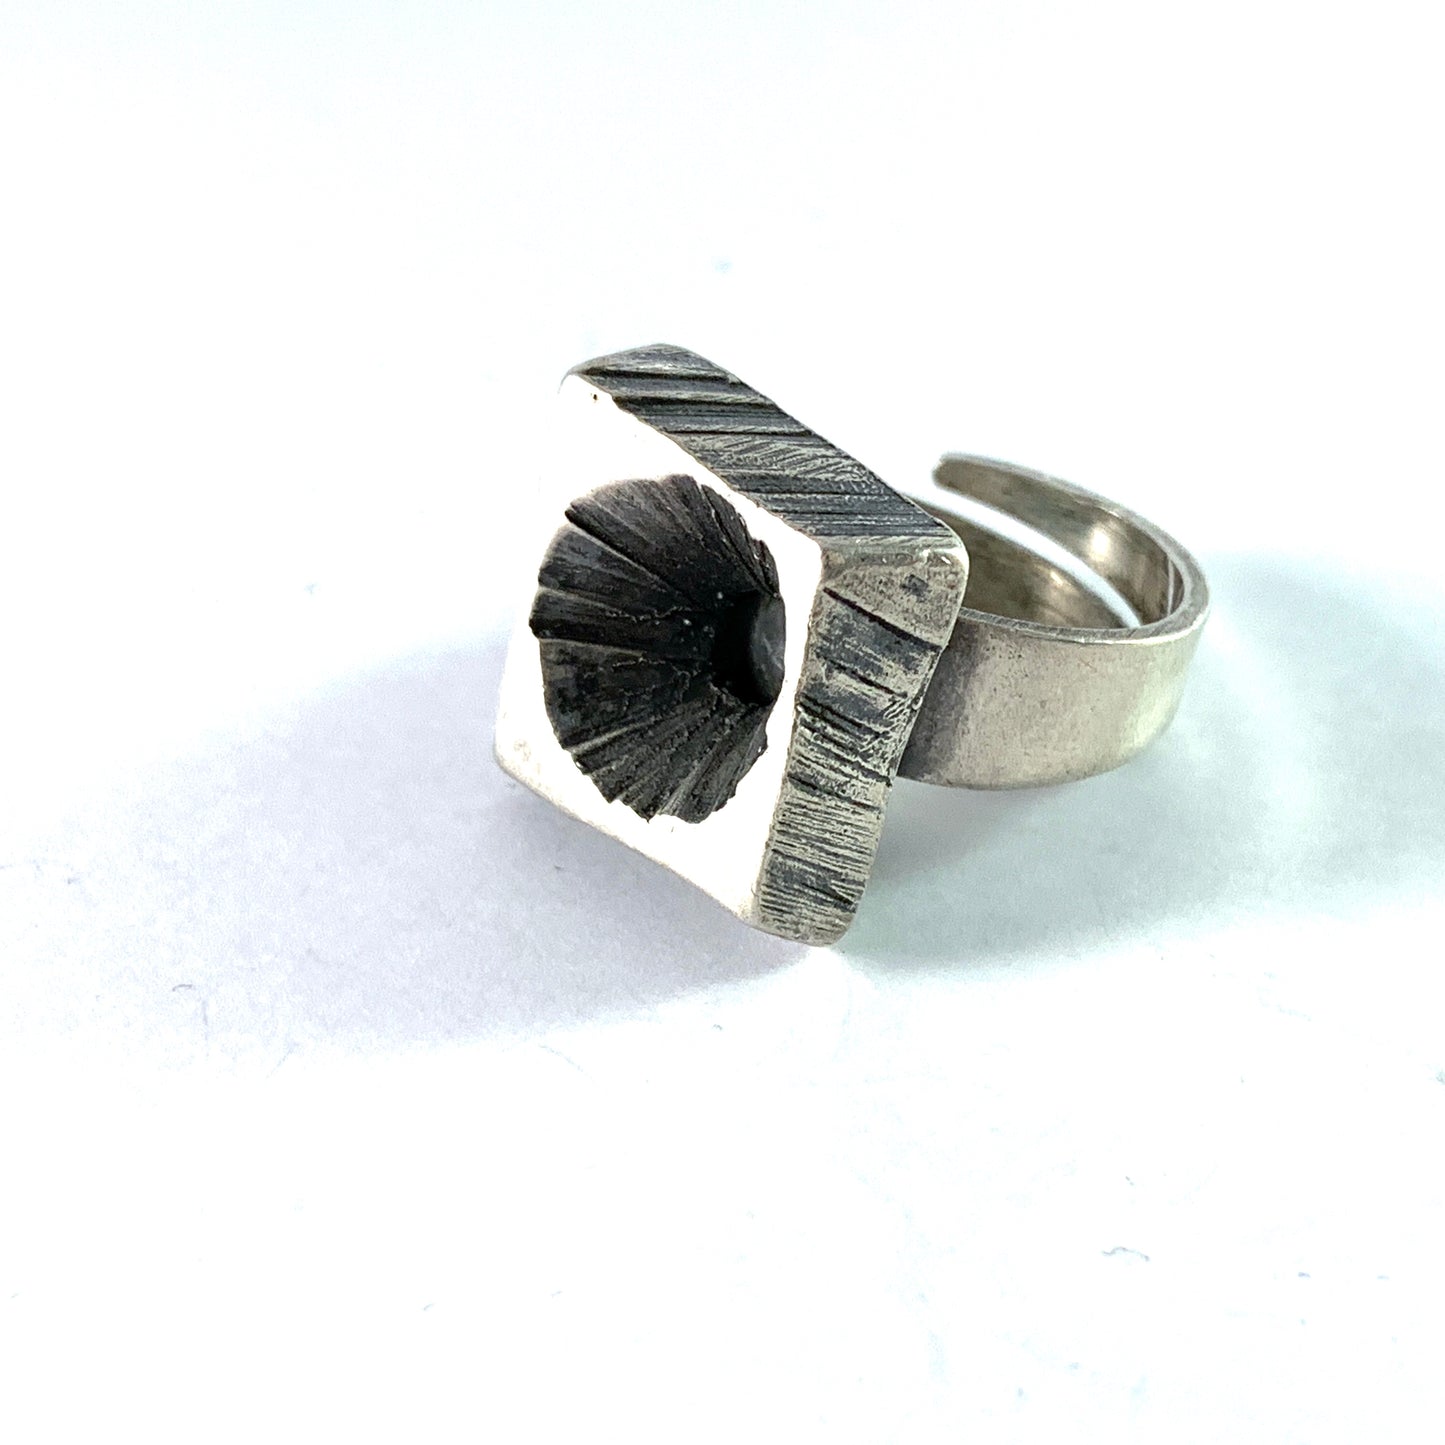 Karl Laine for Stern & Laine, Finland year 1972 Sterling Silver Modernist Ring.